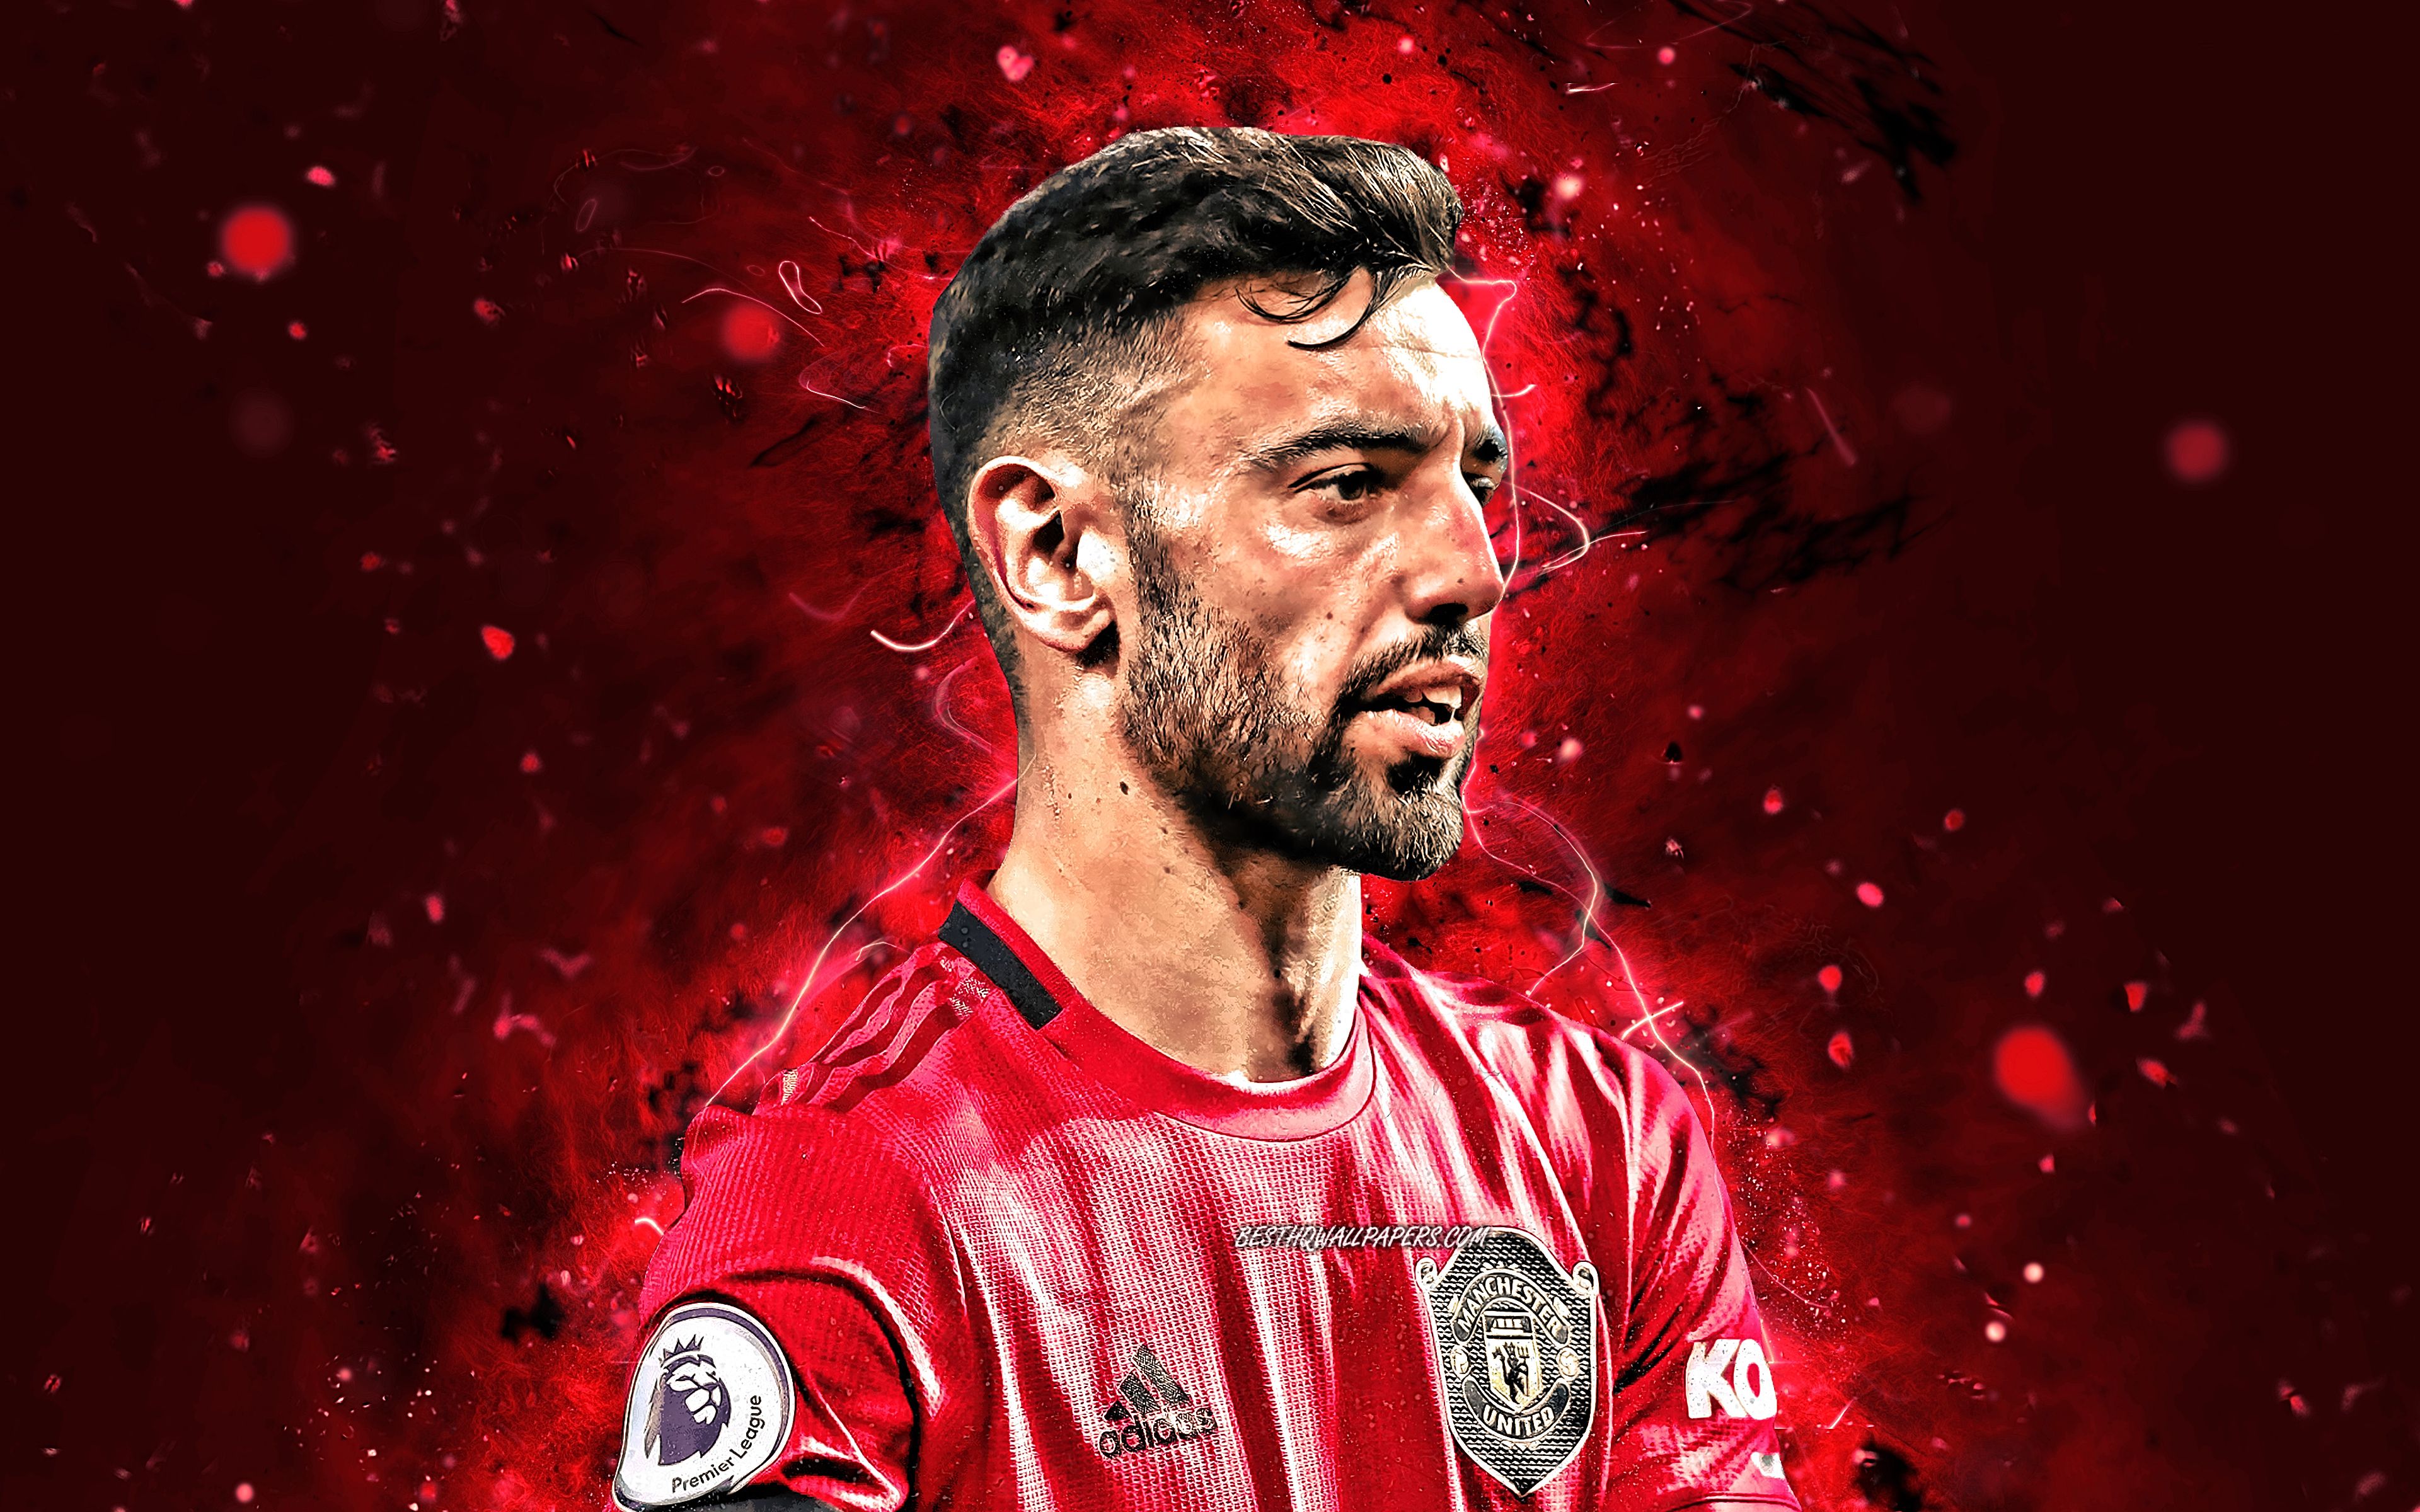 Ouf! 25+ Raisons pour Man Utd Wallpaper 4K Players! If you're looking